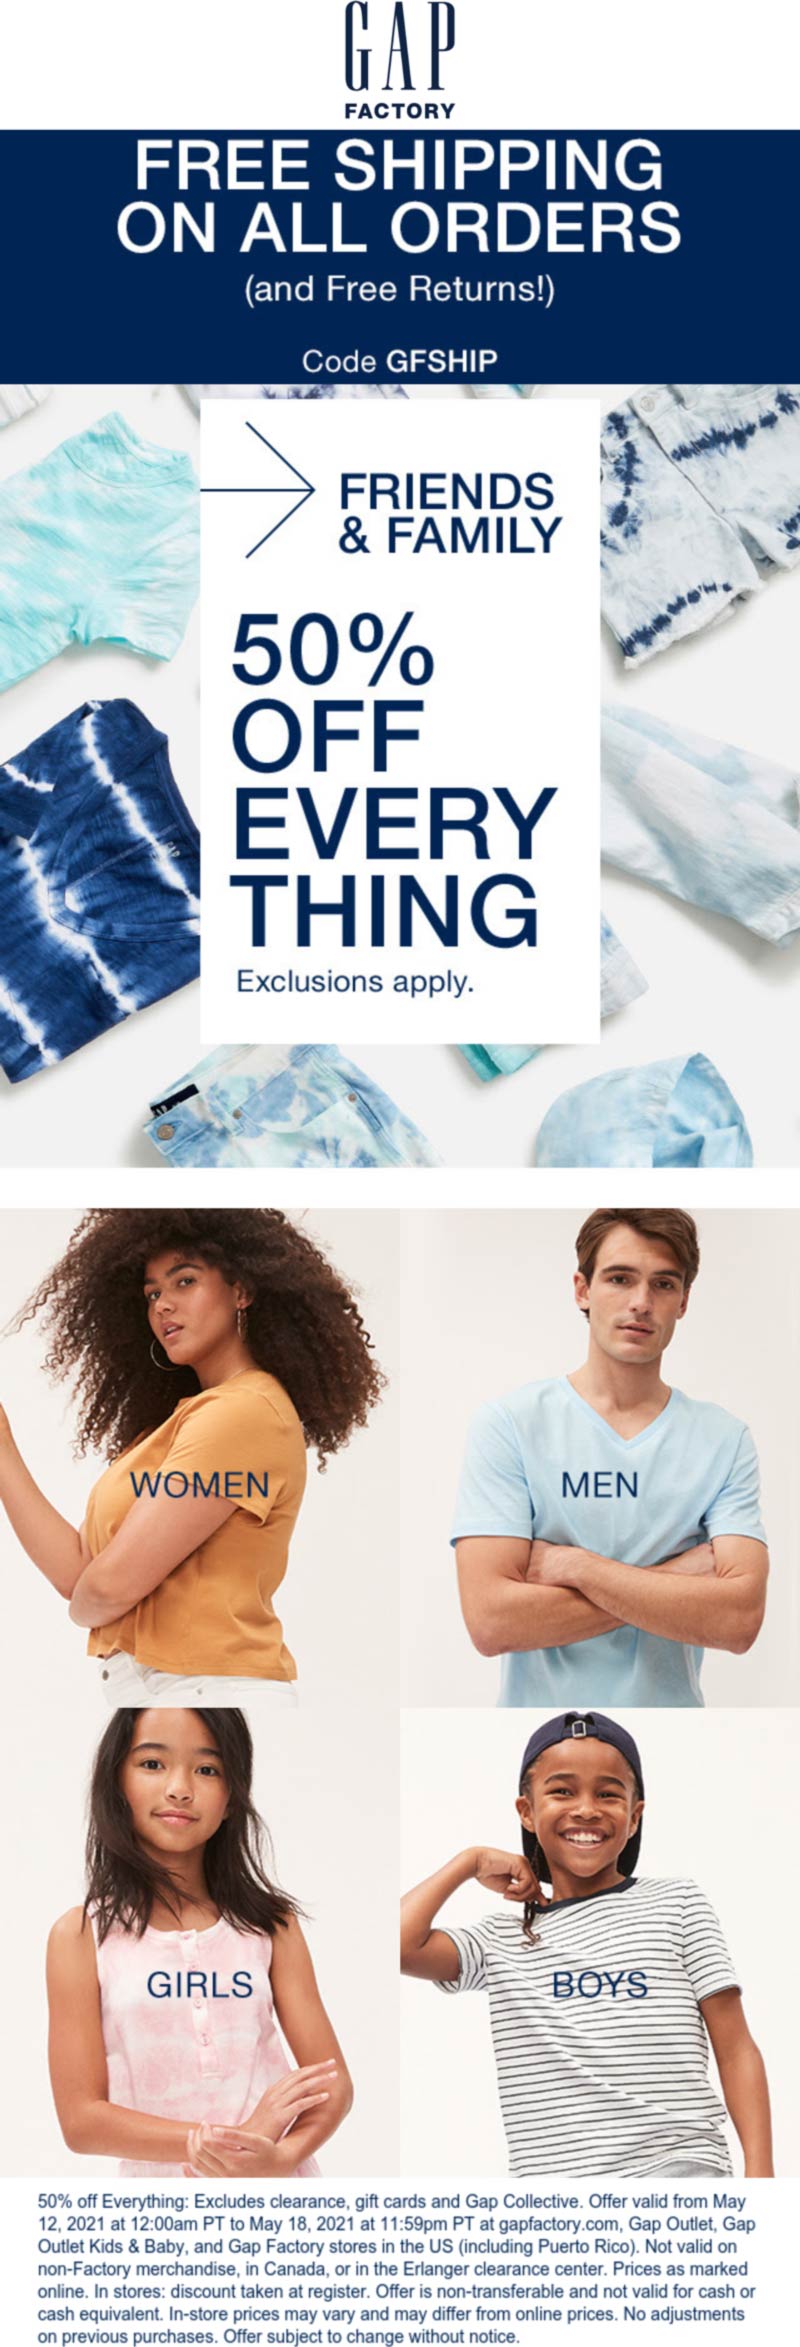 Gap Factory stores Coupon  50% off everything online at Gap Factory with free shipping via promo code GFSHIP #gapfactory 